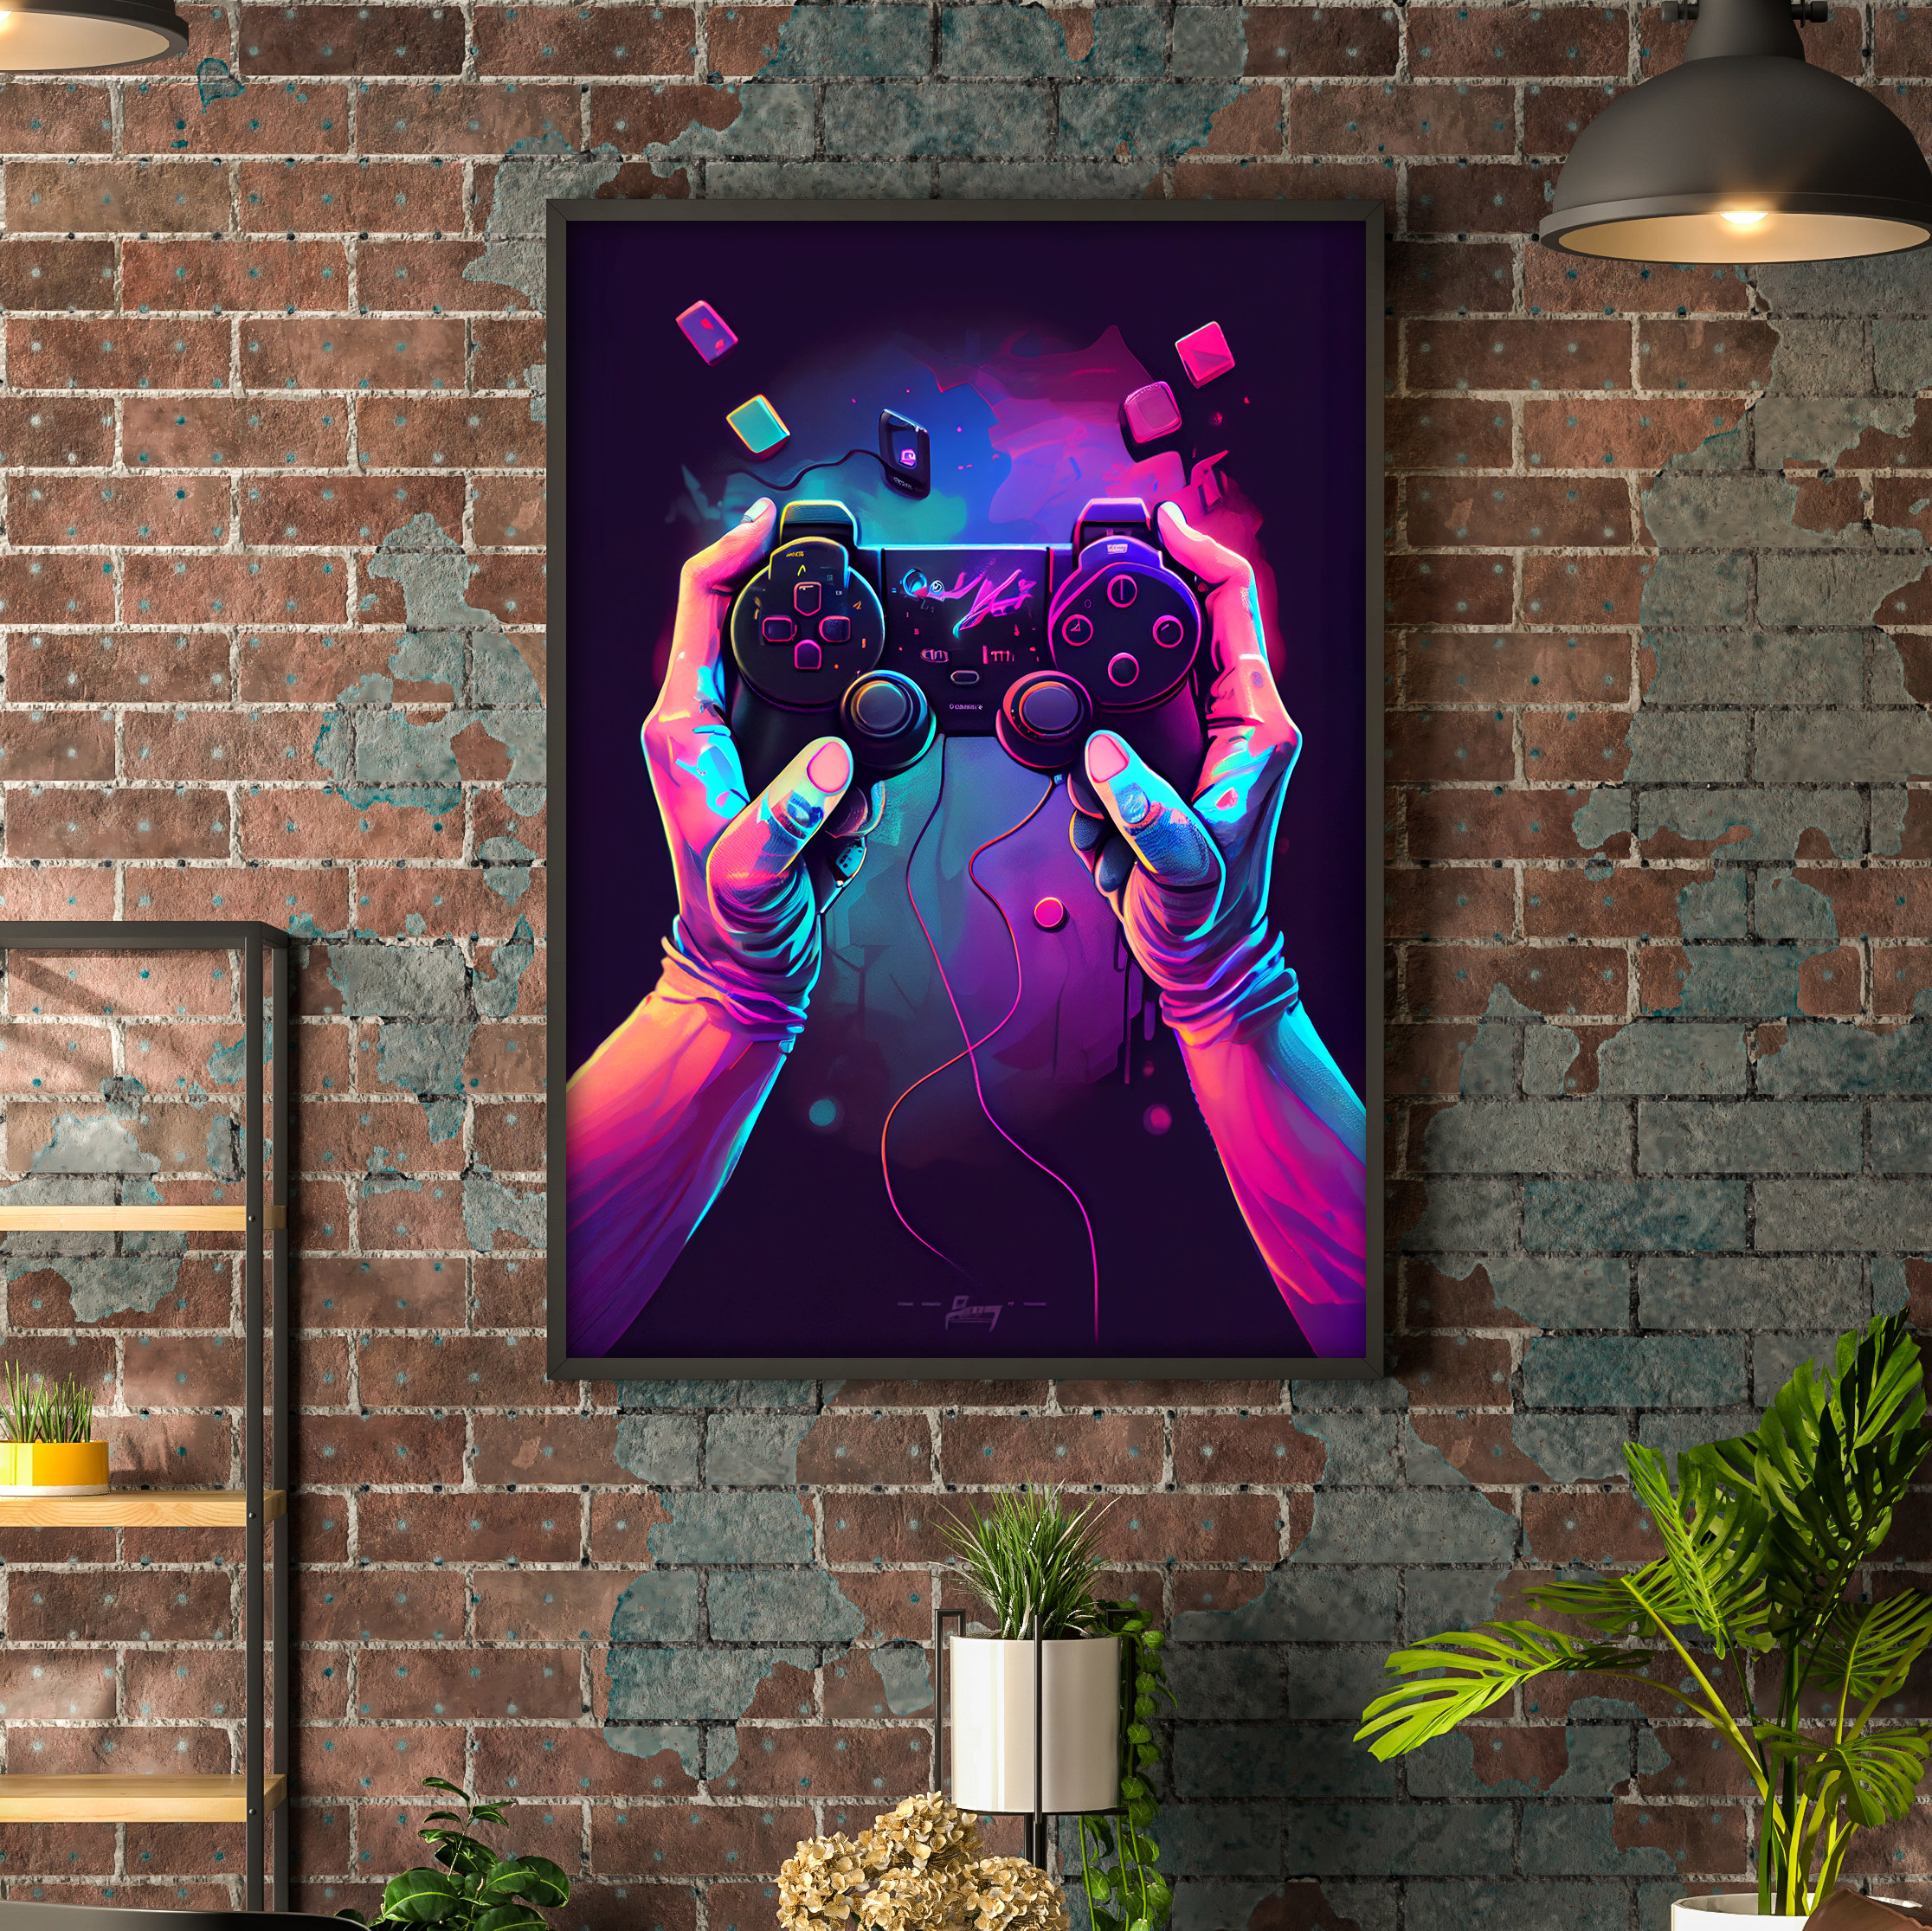 Game Room Decor - Gaming Gifts for PC Gamer, Xbox, PS4, Playstation, Video  Game, Arcade, Men, Teens, Kids - Remote Control Wall Art - Urban Graffiti